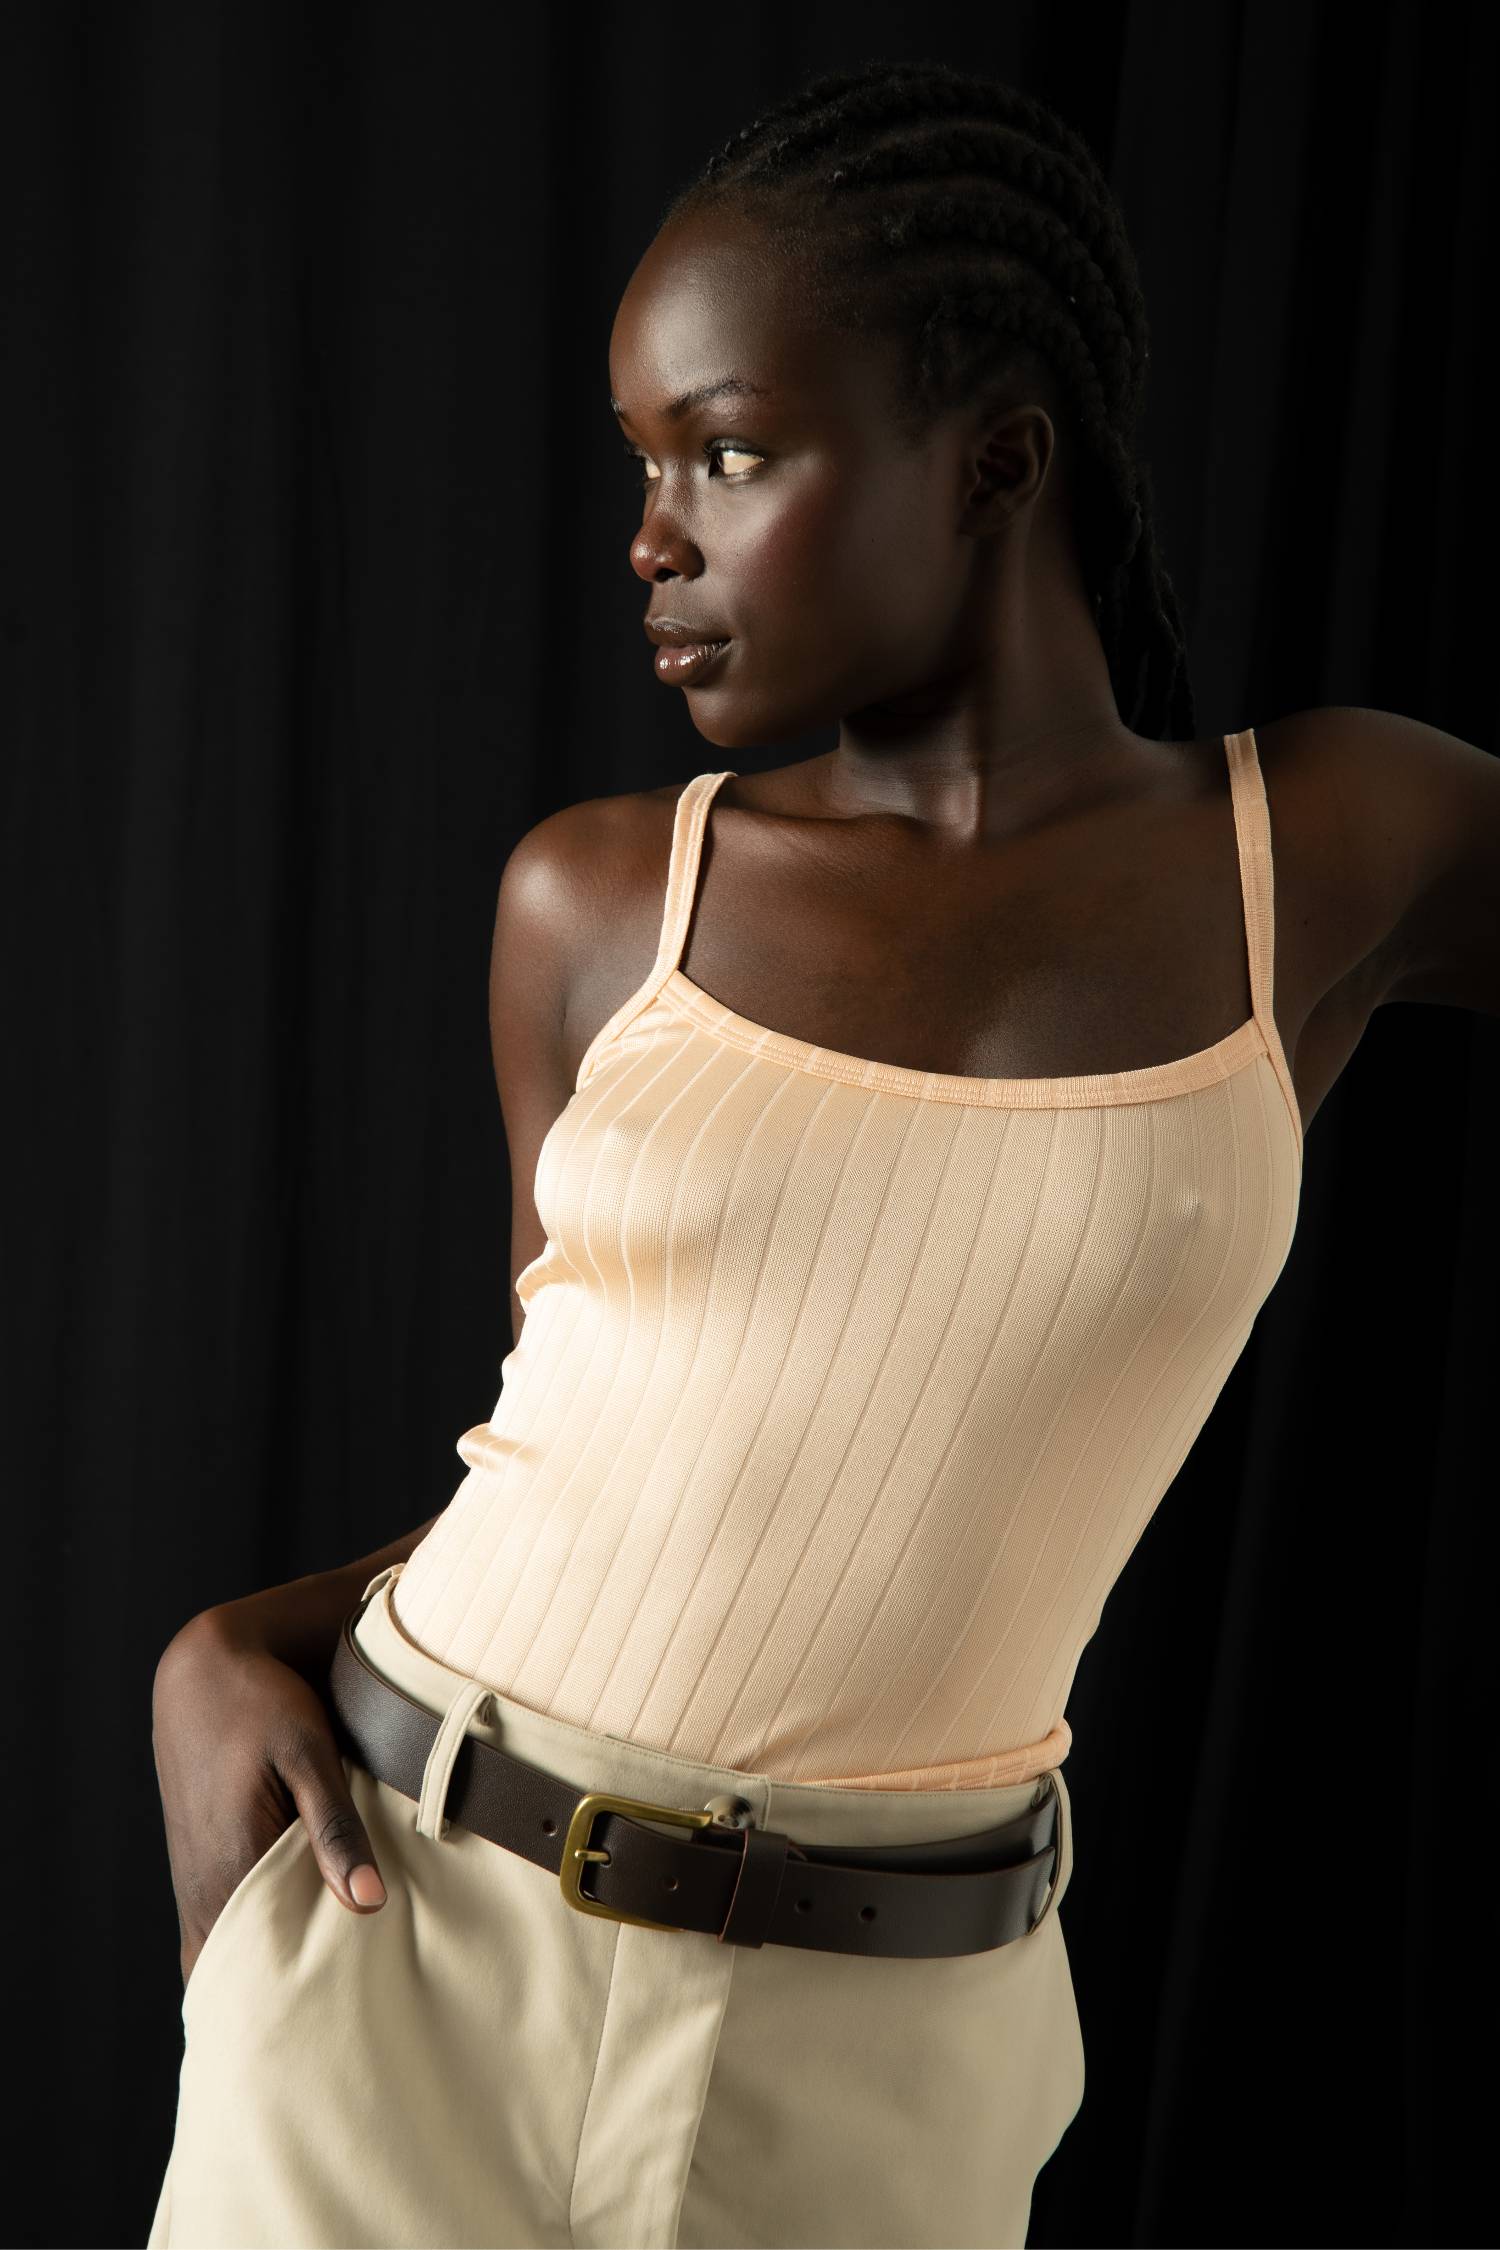 Camisole | Ribbed Apricot